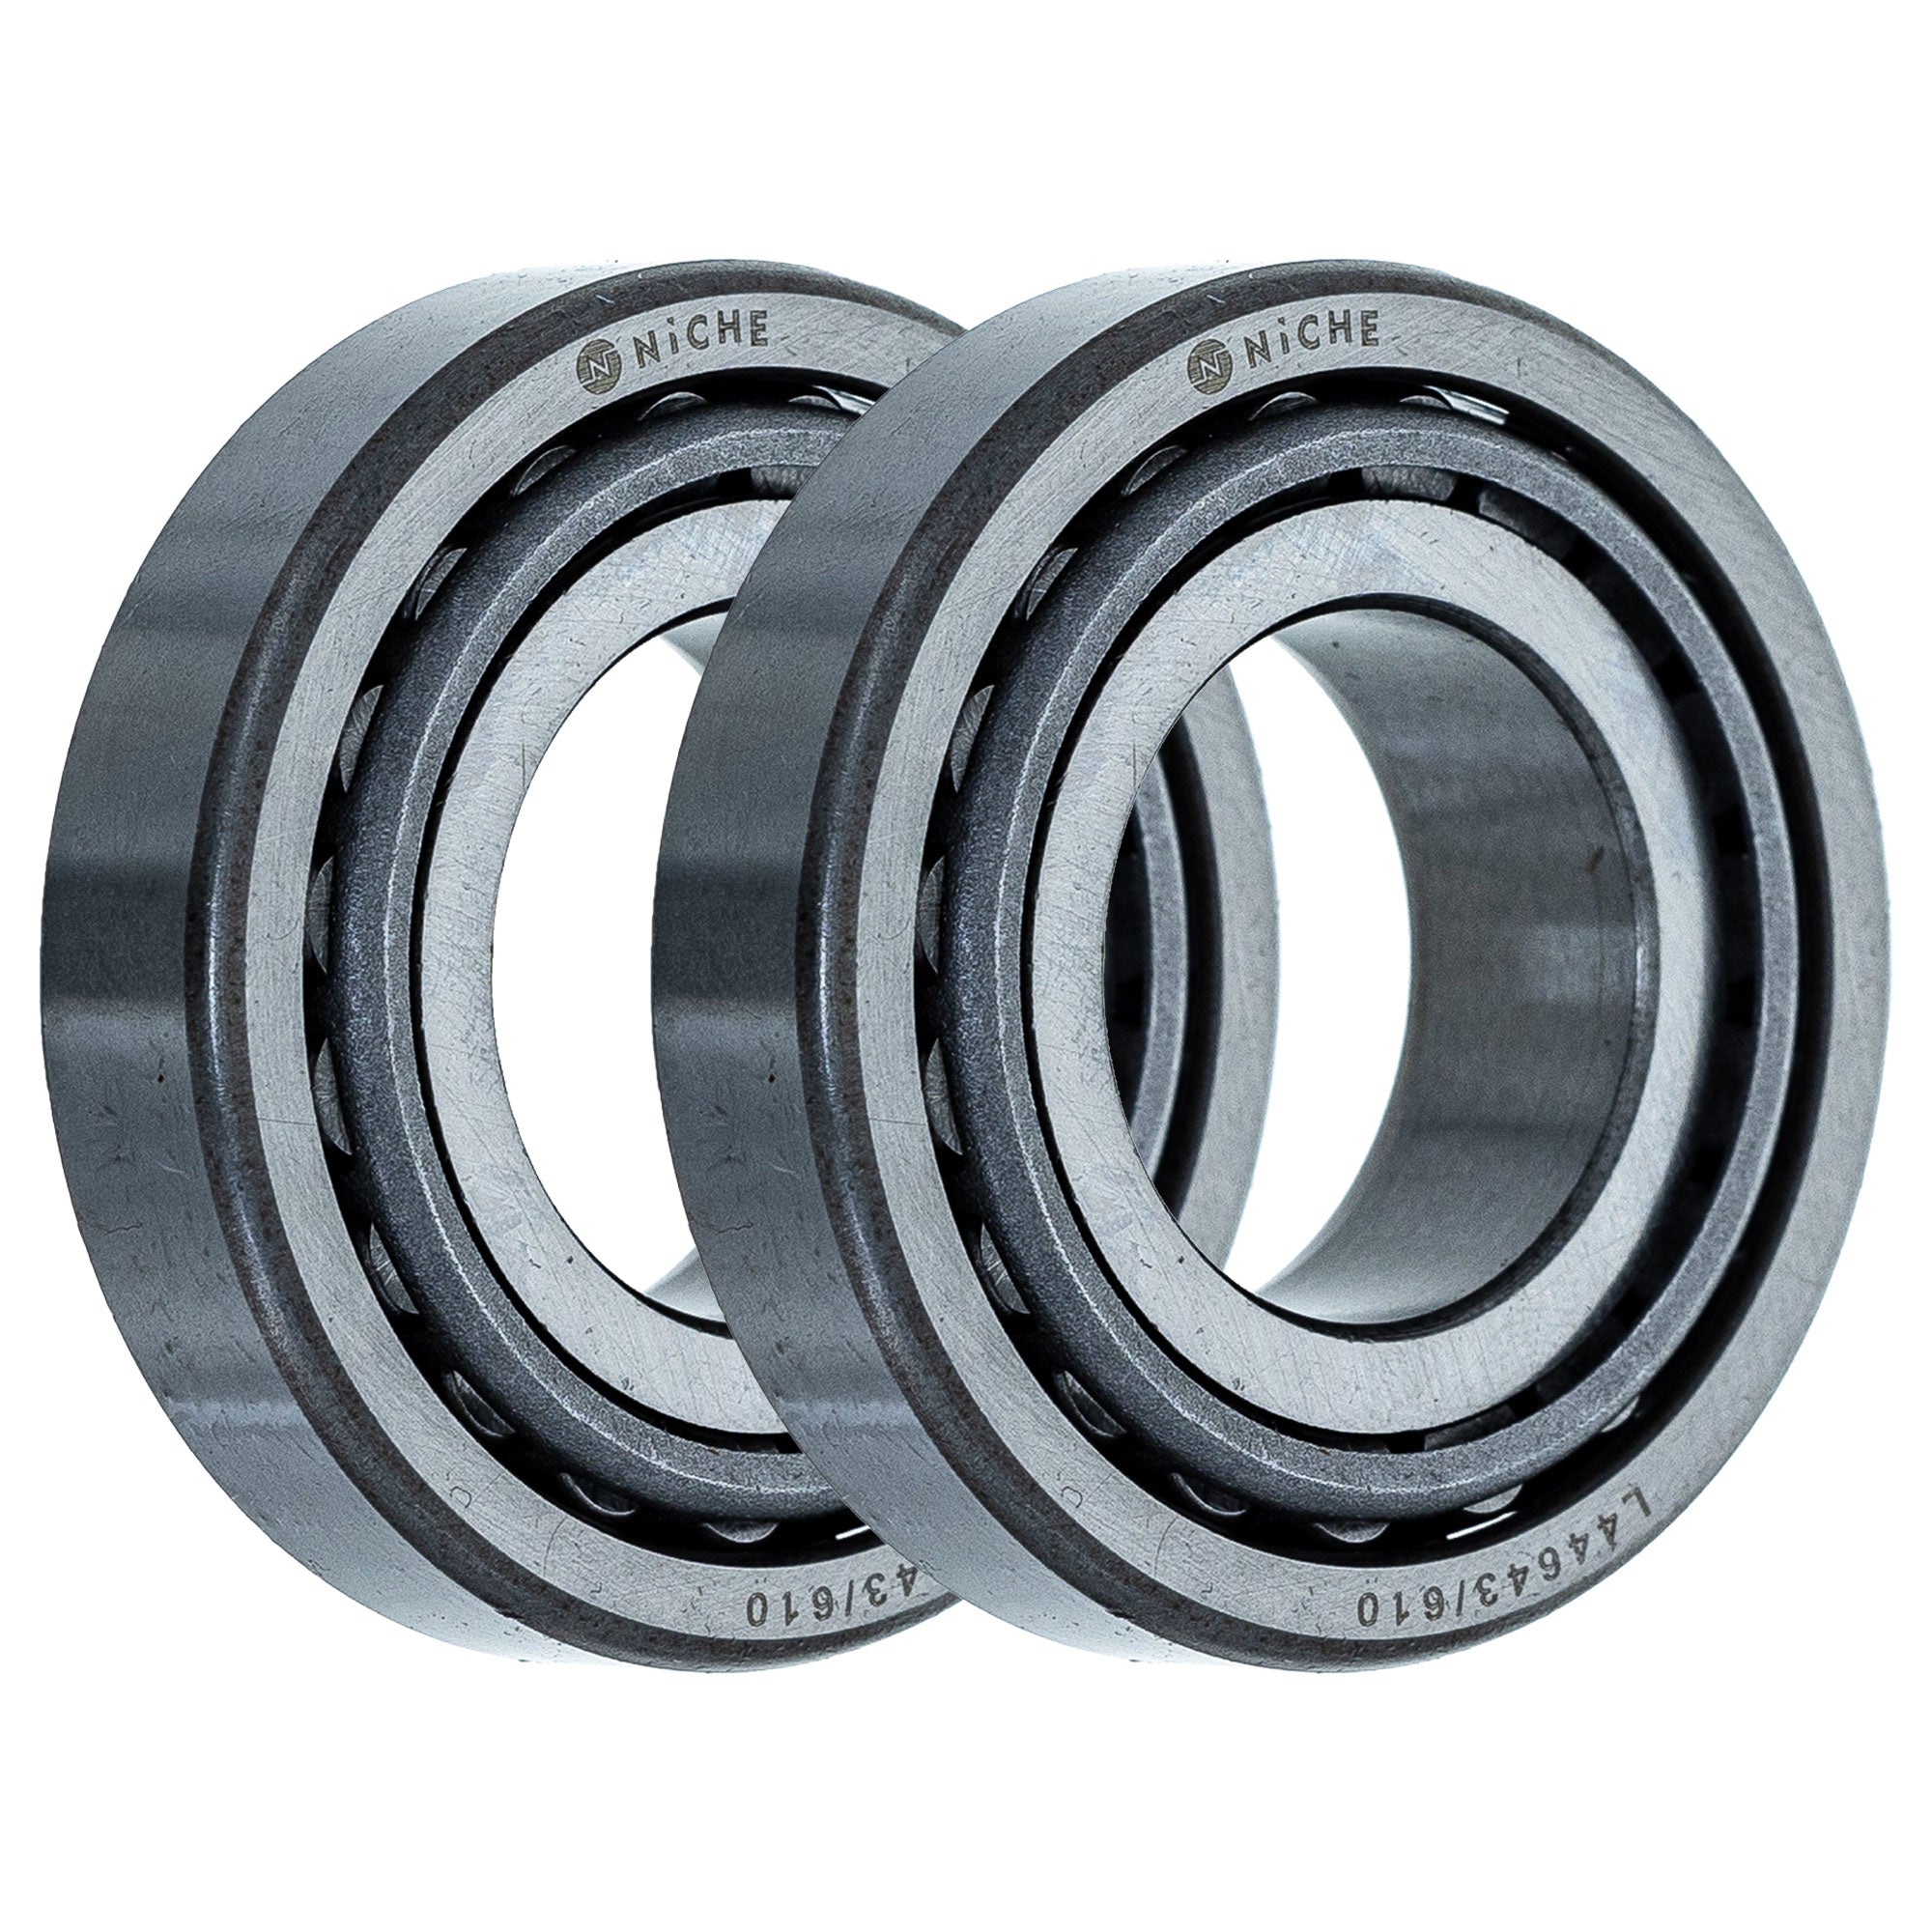 Tapered Roller Bearing Pack of 2 2-Pack for zOTHER Xpress Xplorer Xpedition Worker NICHE 519-CBB2240R